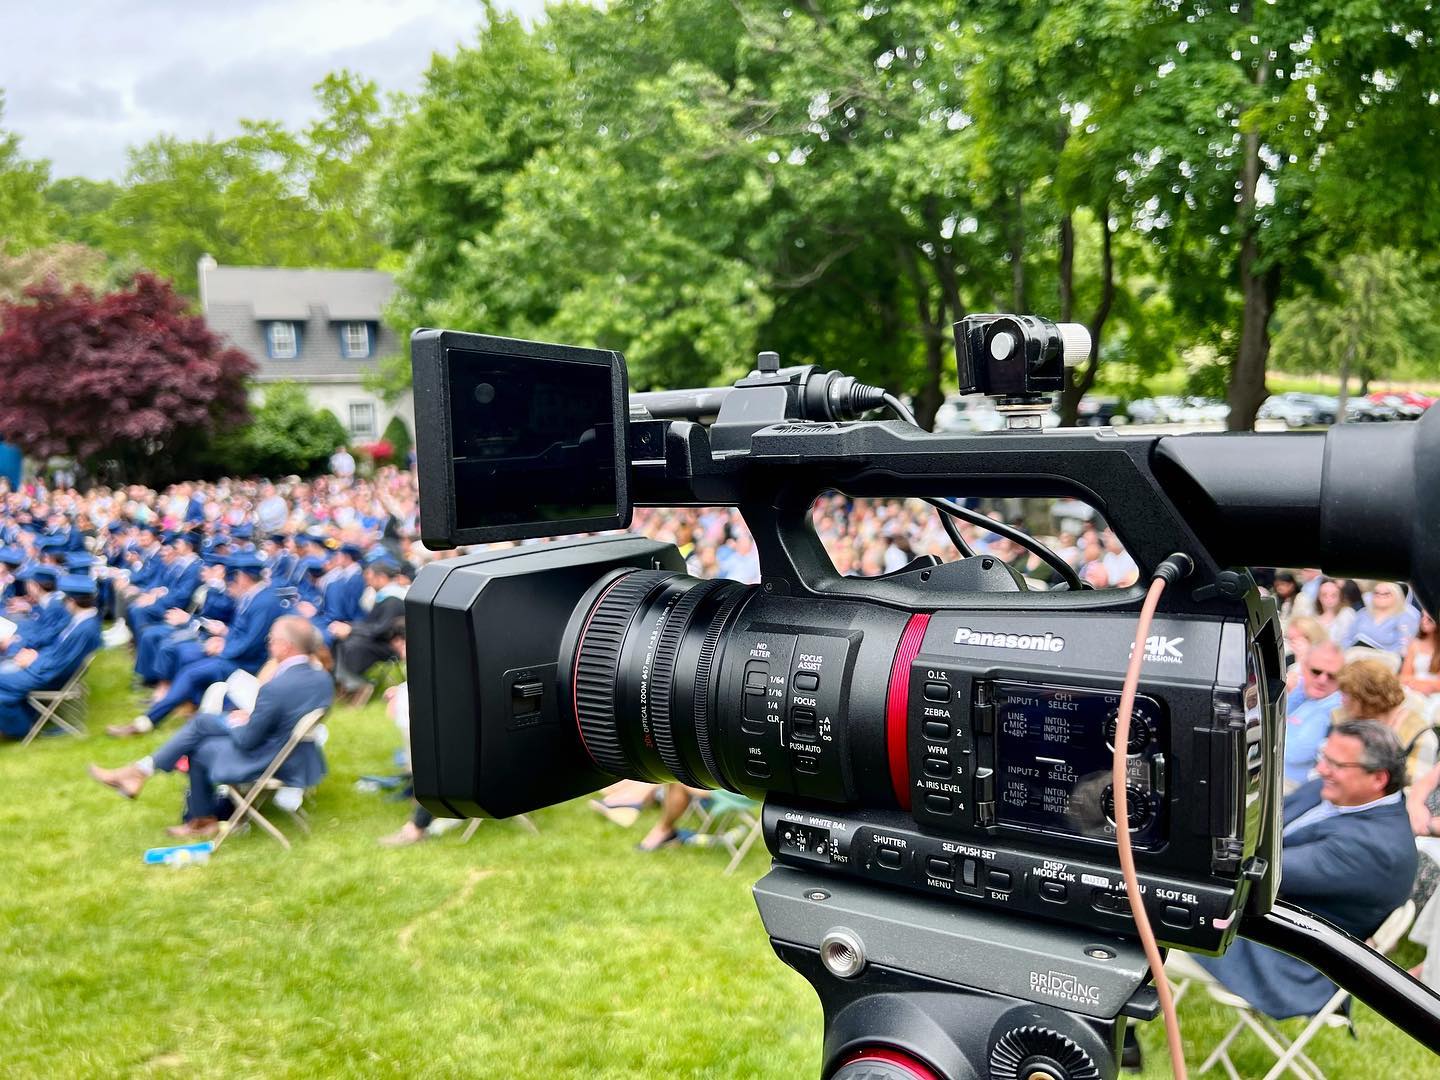 The first graduation of 2022 is here! Congratulations to the seniors of @malvernprep!